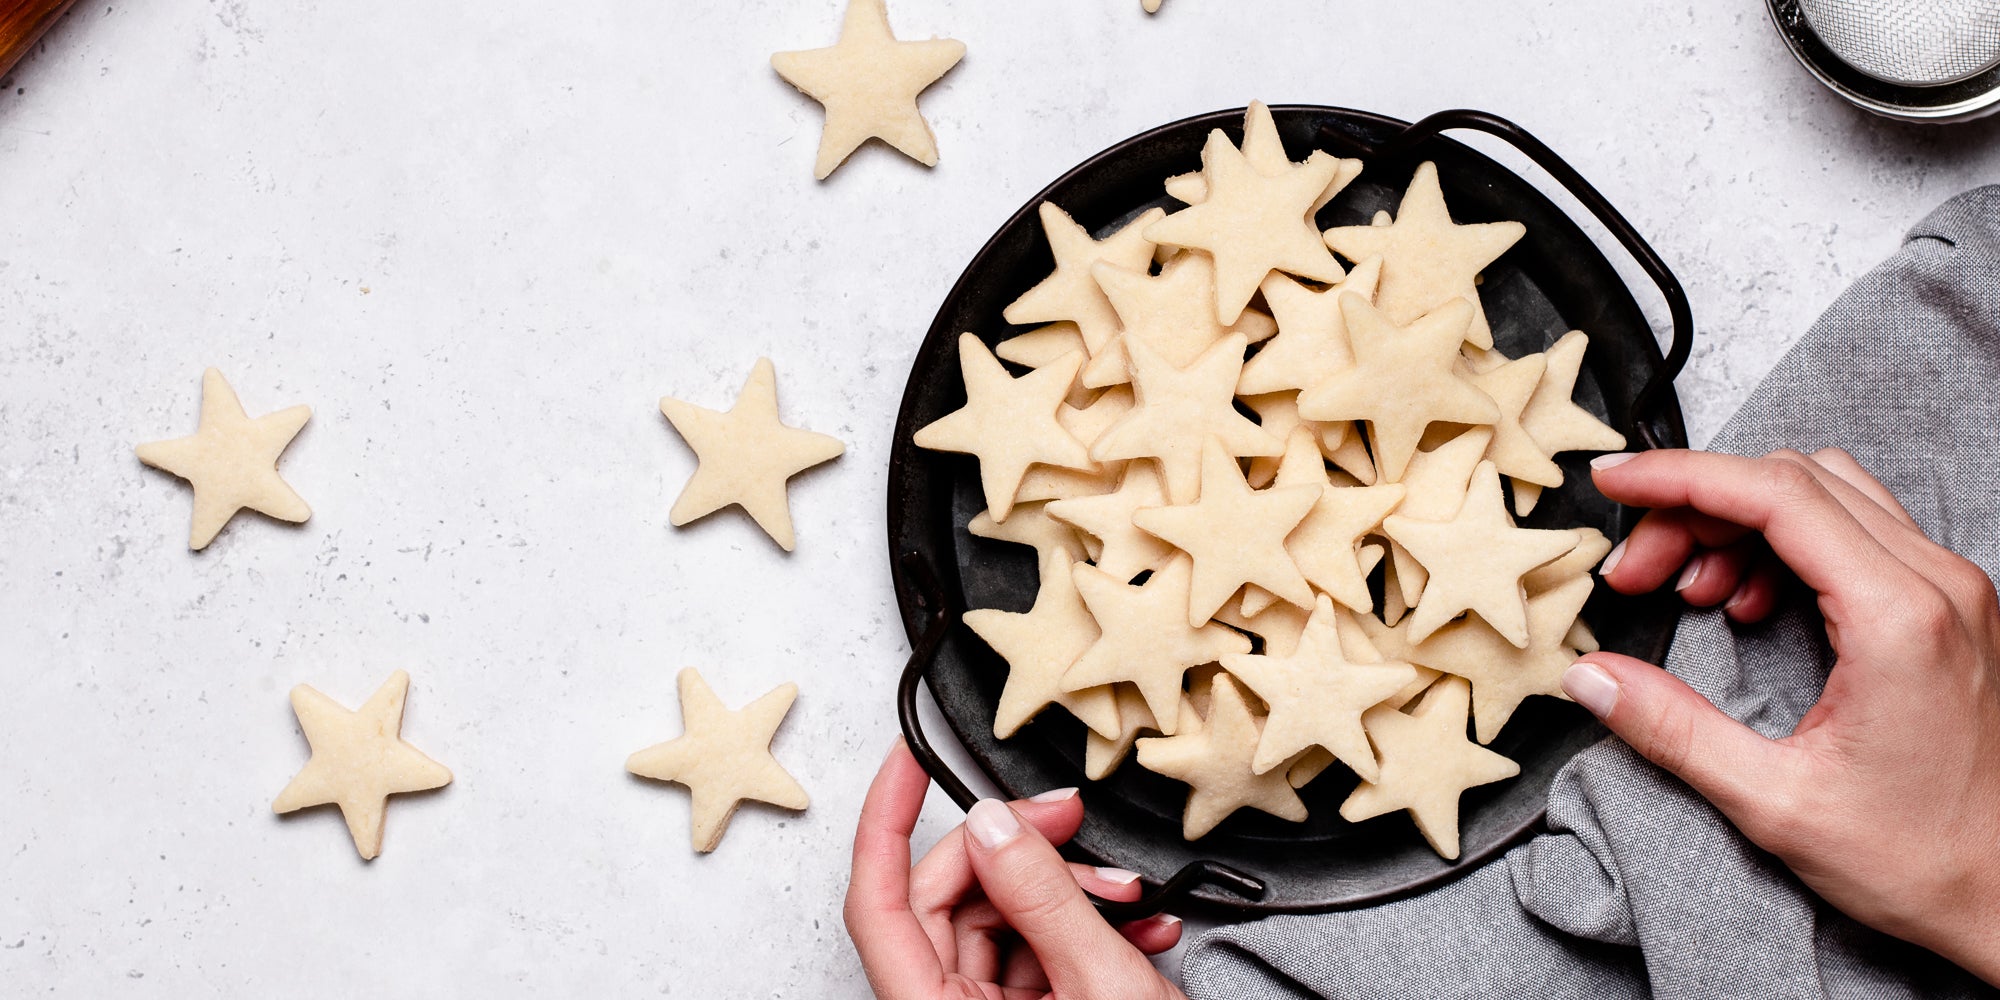 A top down view of a hand taking from some star shaped vegan biscuits in a bowl